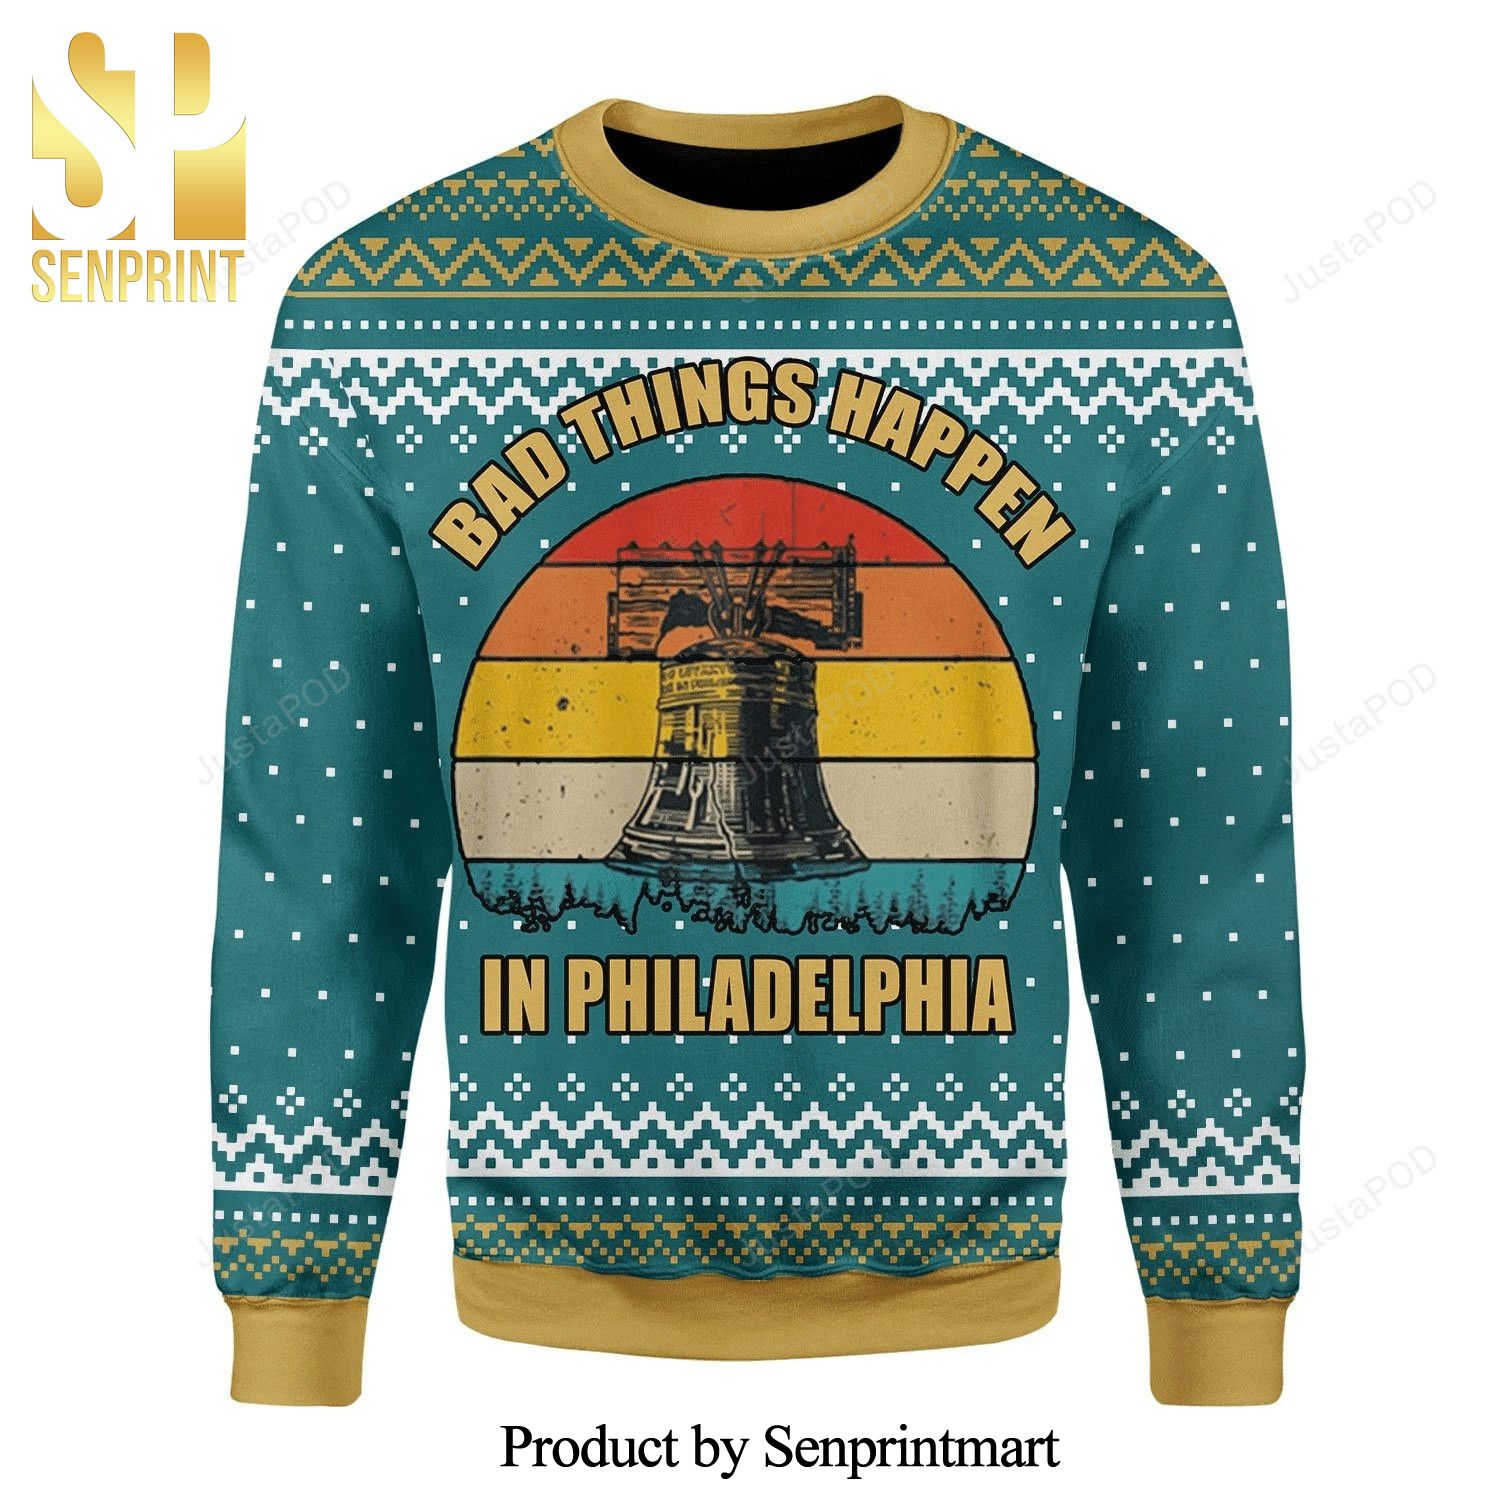 Bad Things Happen In Philadelphia Knitted Ugly Christmas Sweater